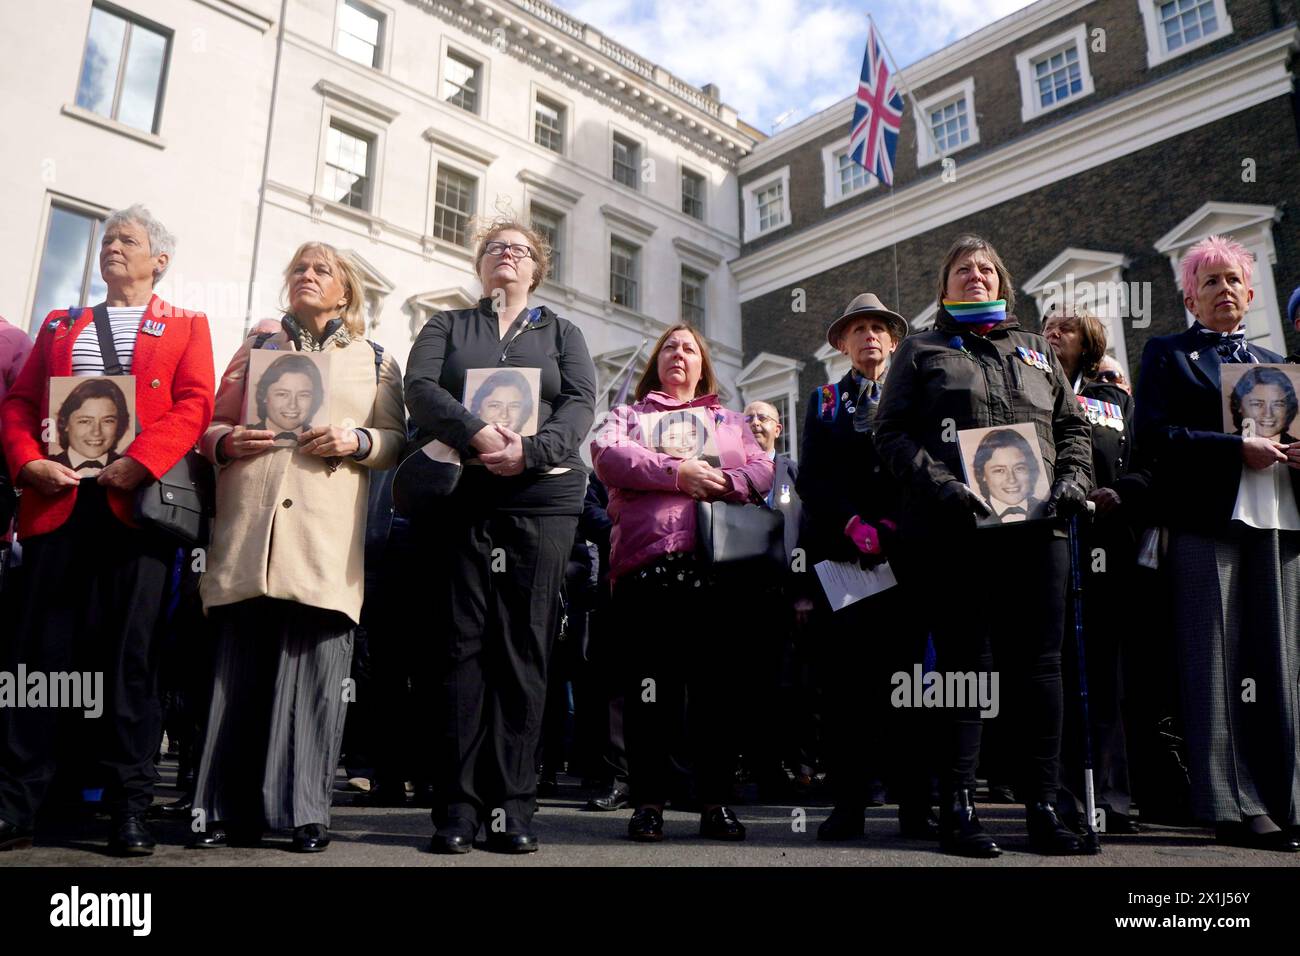 Colleagues of Pc Yvonne Fletcher hold photos of her as they gather in St James's Square, London, for a 40th anniversary memorial service. Pc Fletcher was murdered on 17 April 1984 by a shot fired from the Libyan embassy in St James's Square, London, after she had been deployed to monitor a demonstration against the then Libyan leader Muammar Gaddafi. Picture date: Wednesday April 17, 2024. Stock Photo